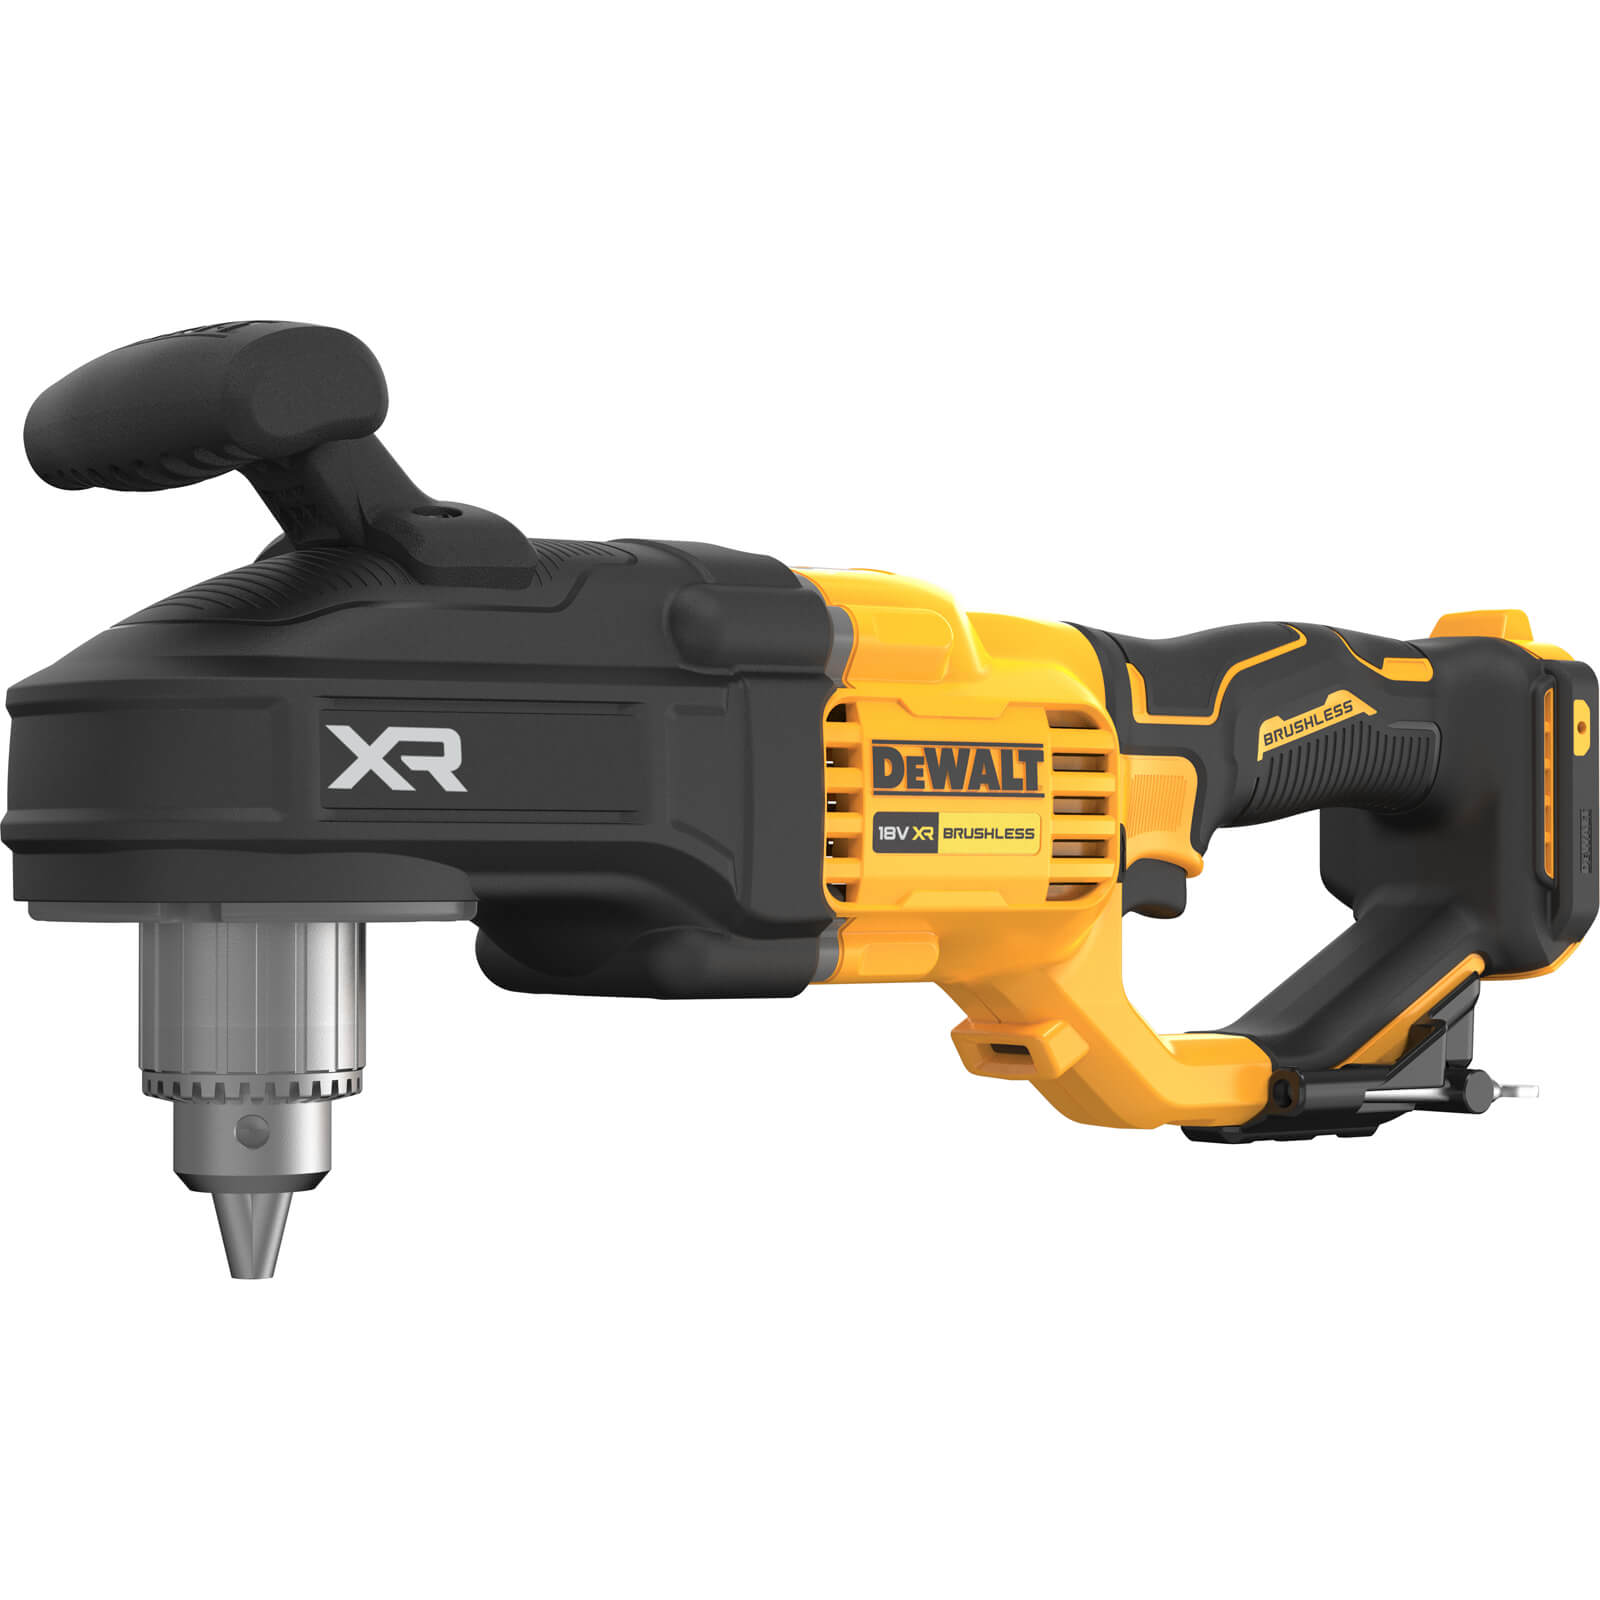 Image of DeWalt DCD444 18v XR Cordless Stud and Joist Angle Drill No Batteries No Charger No Case